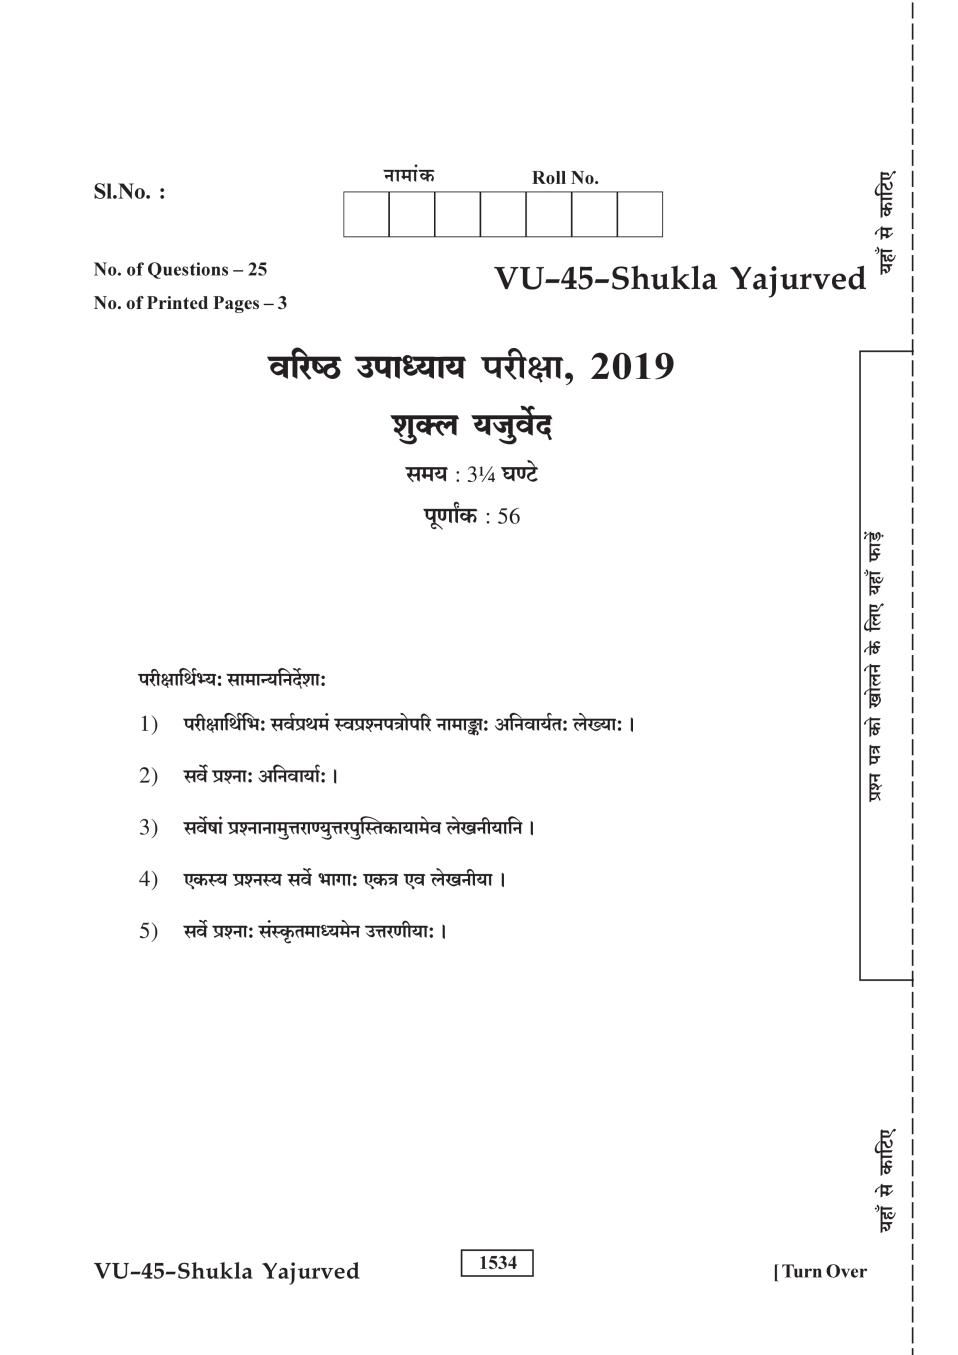 Rajasthan Board V Upadhyay Shukla Yajurved Question Paper 2019 - Page 1